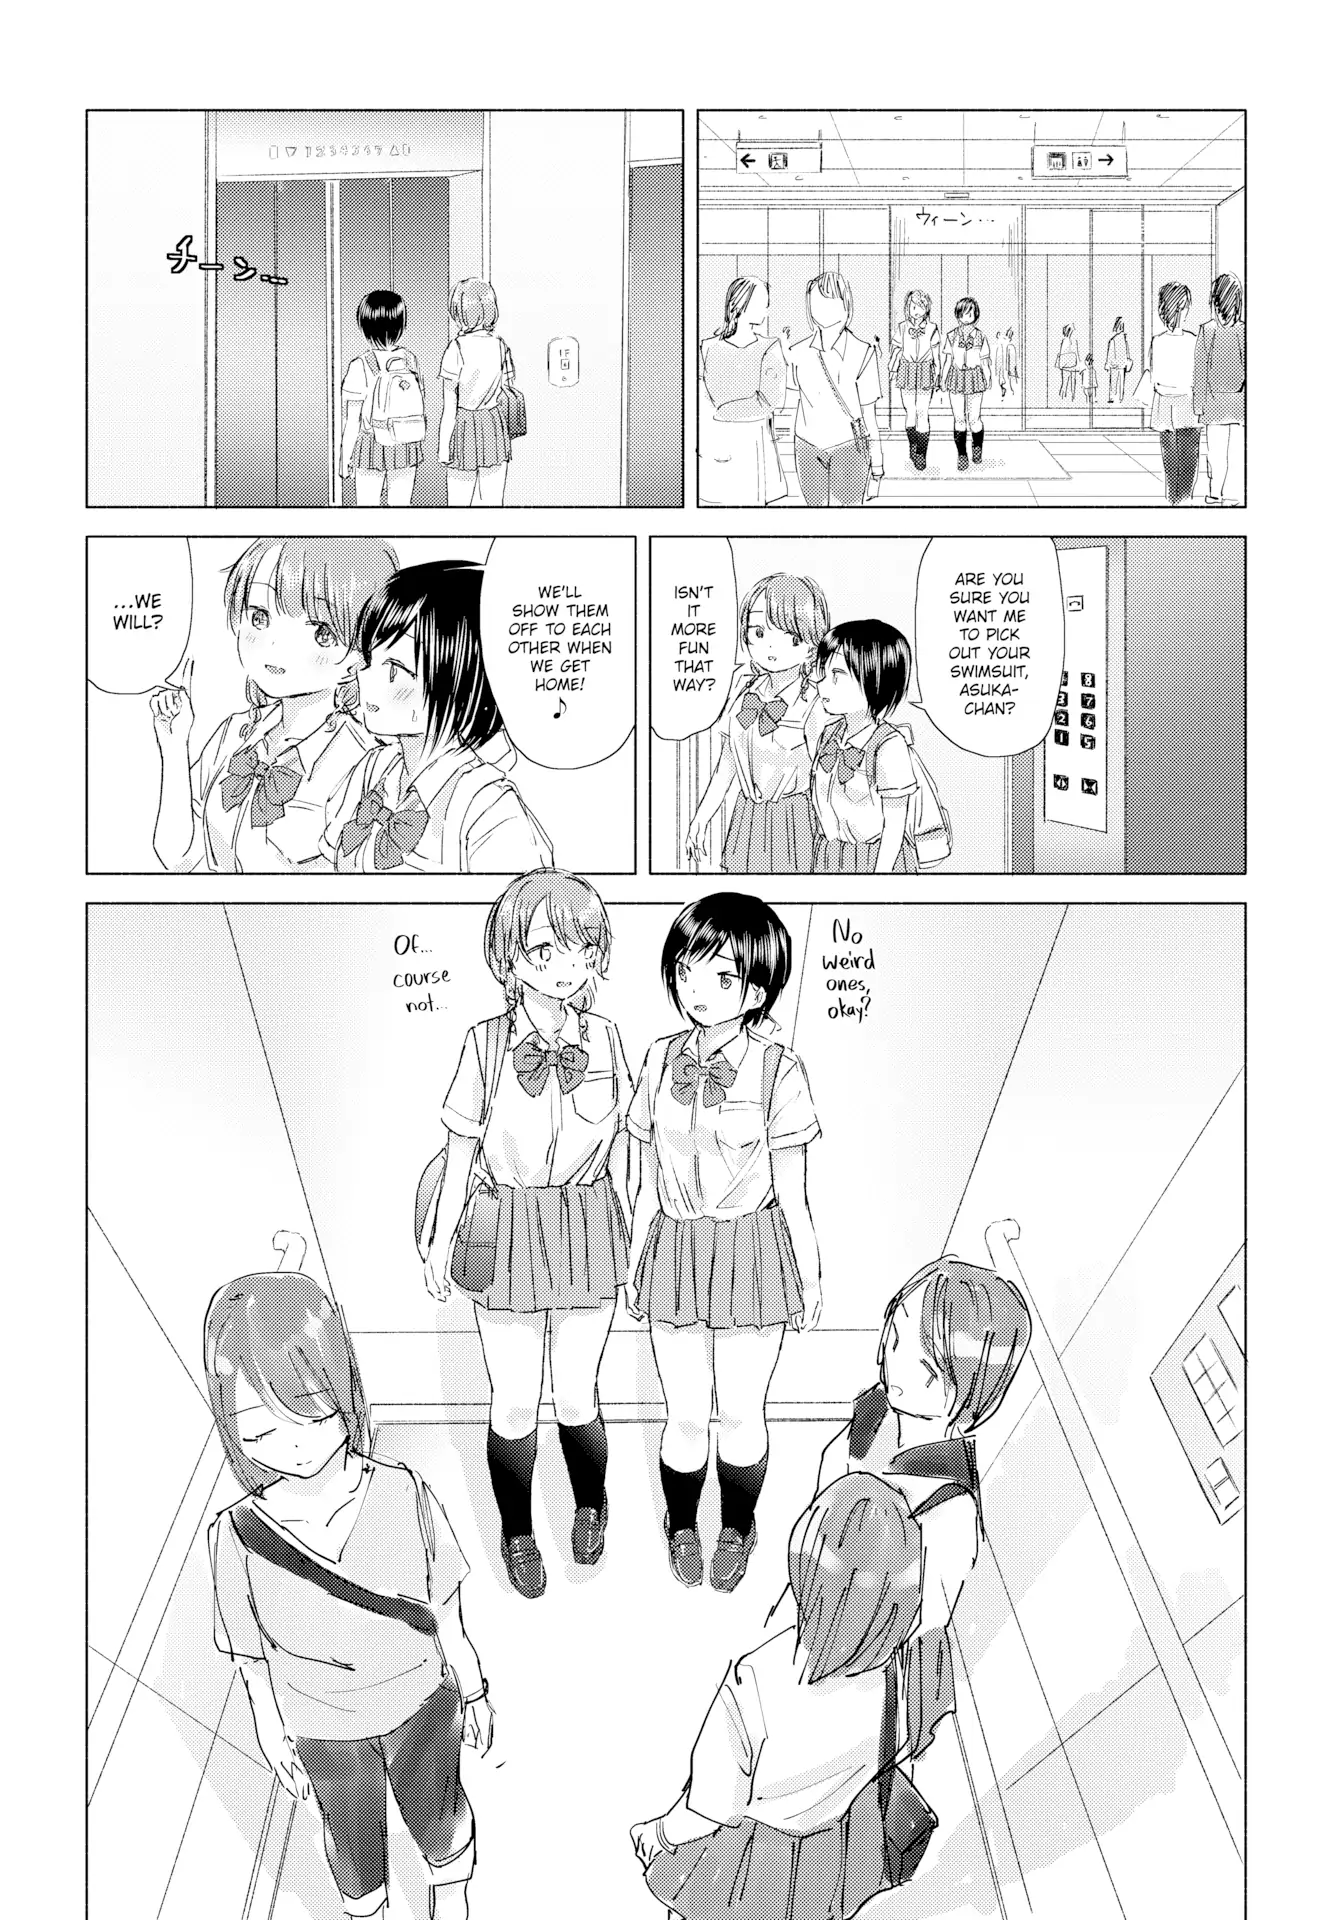 When We Get Home, Asuka-chan and I Will… Chapter 1 - page 2